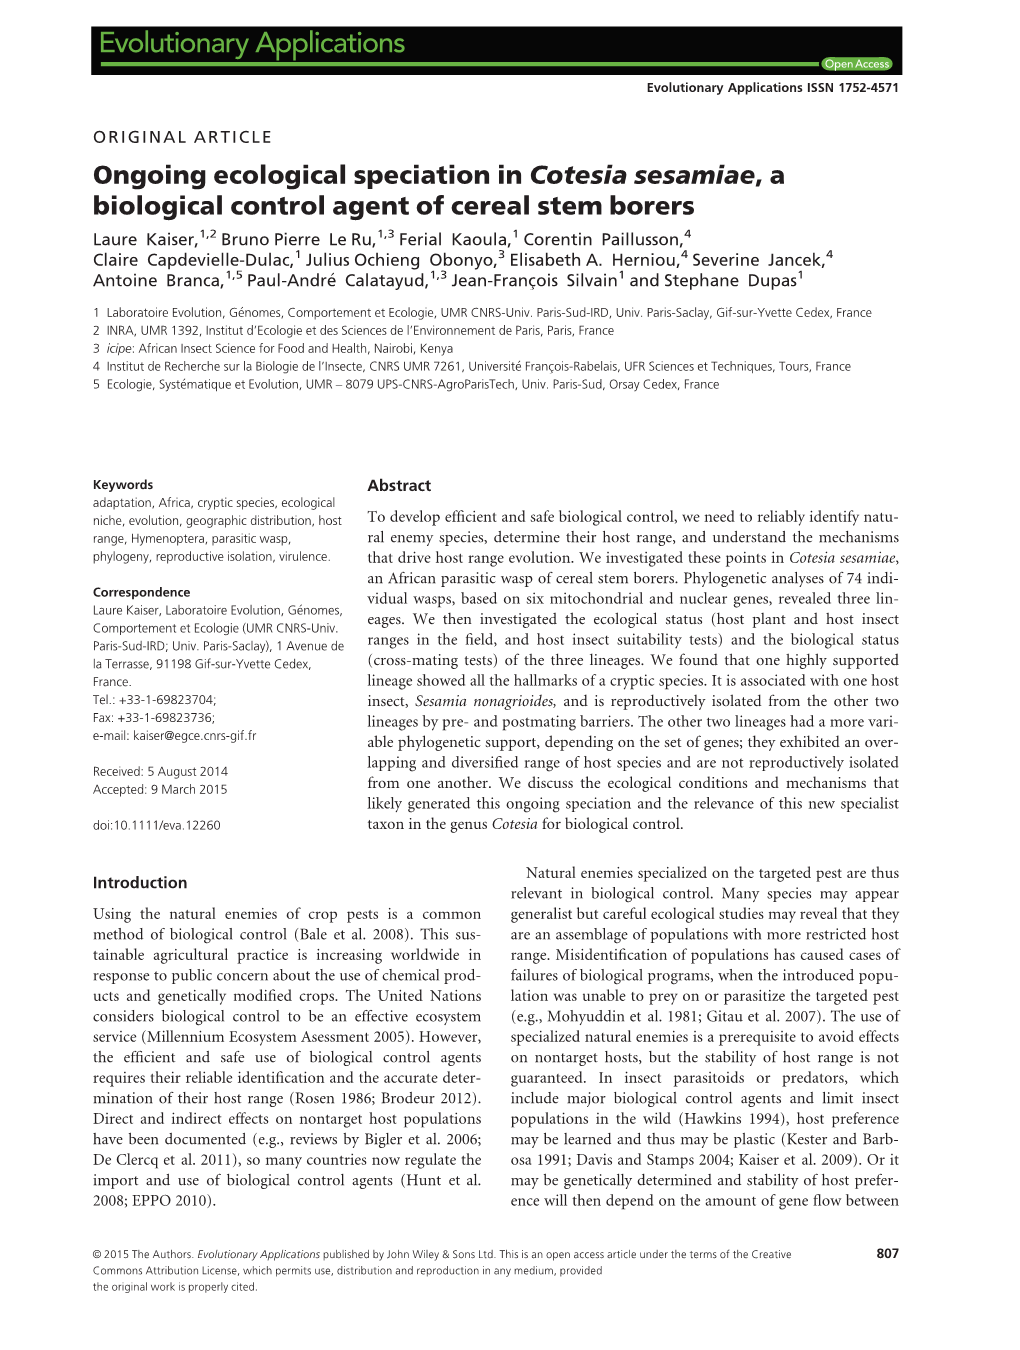 Ongoing Ecological Speciation in Cotesia Sesamiae, a Biological Control Agent of Cereal Stem Borers